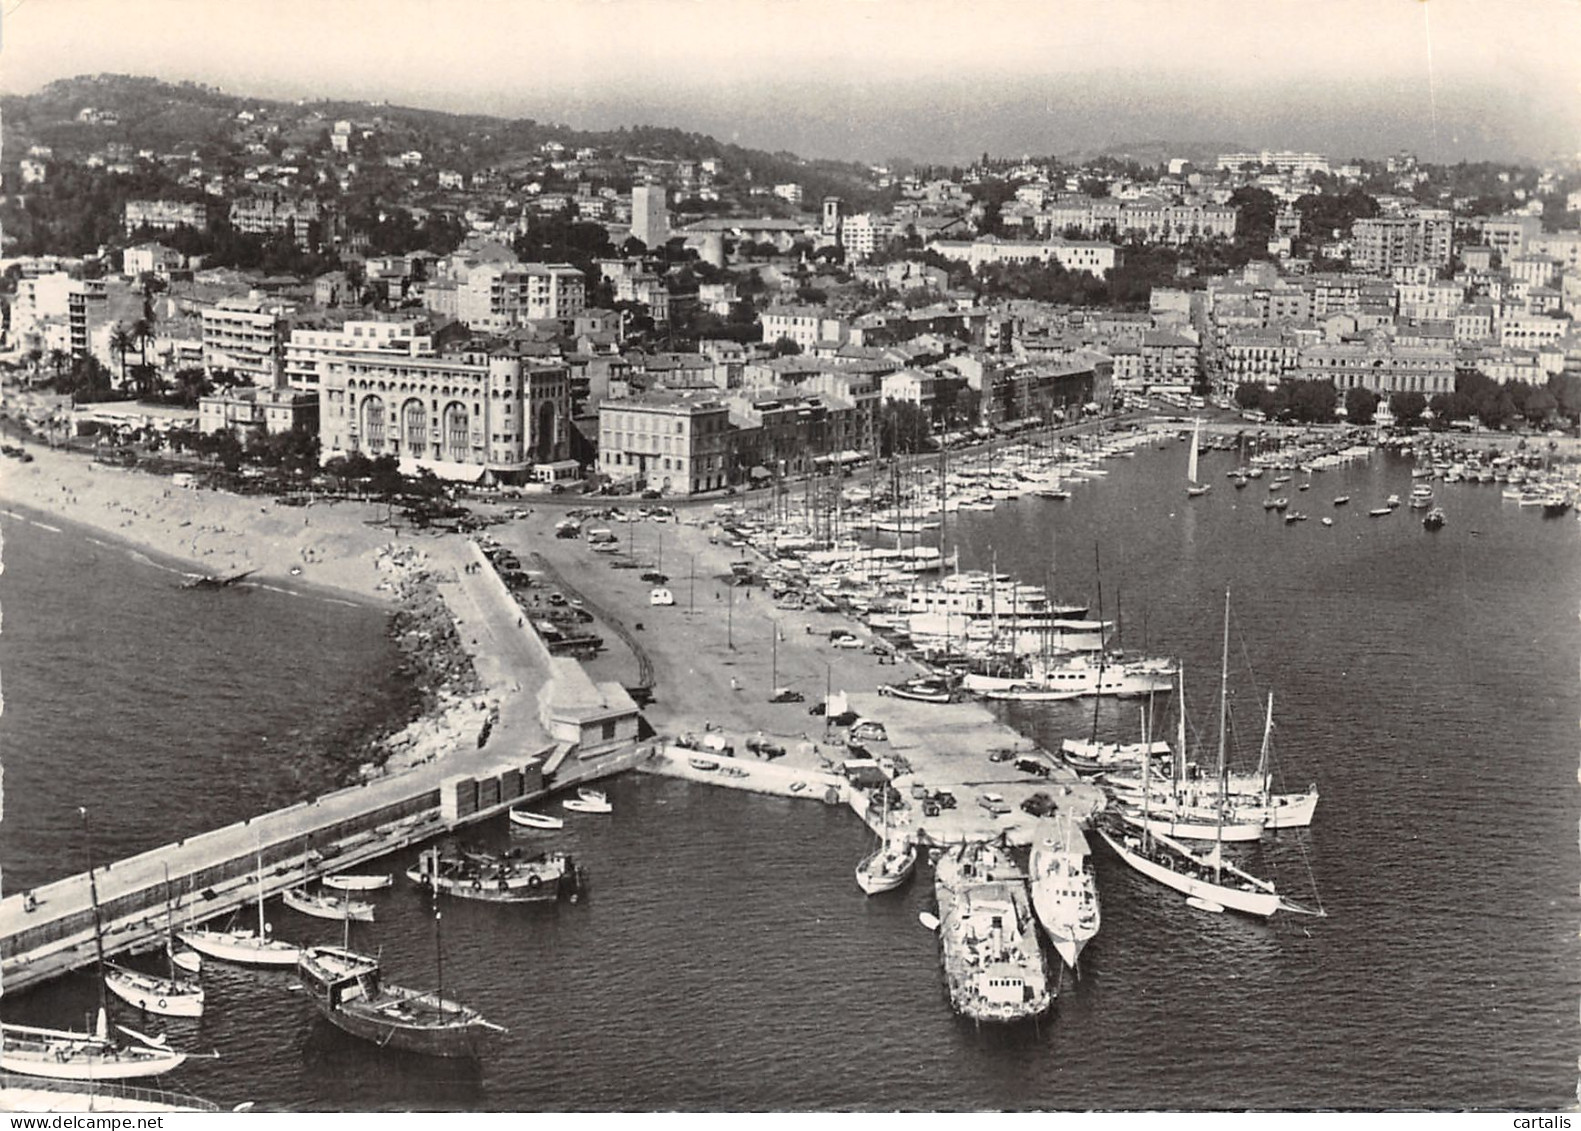 06-CANNES-N 596-C/0103 - Cannes